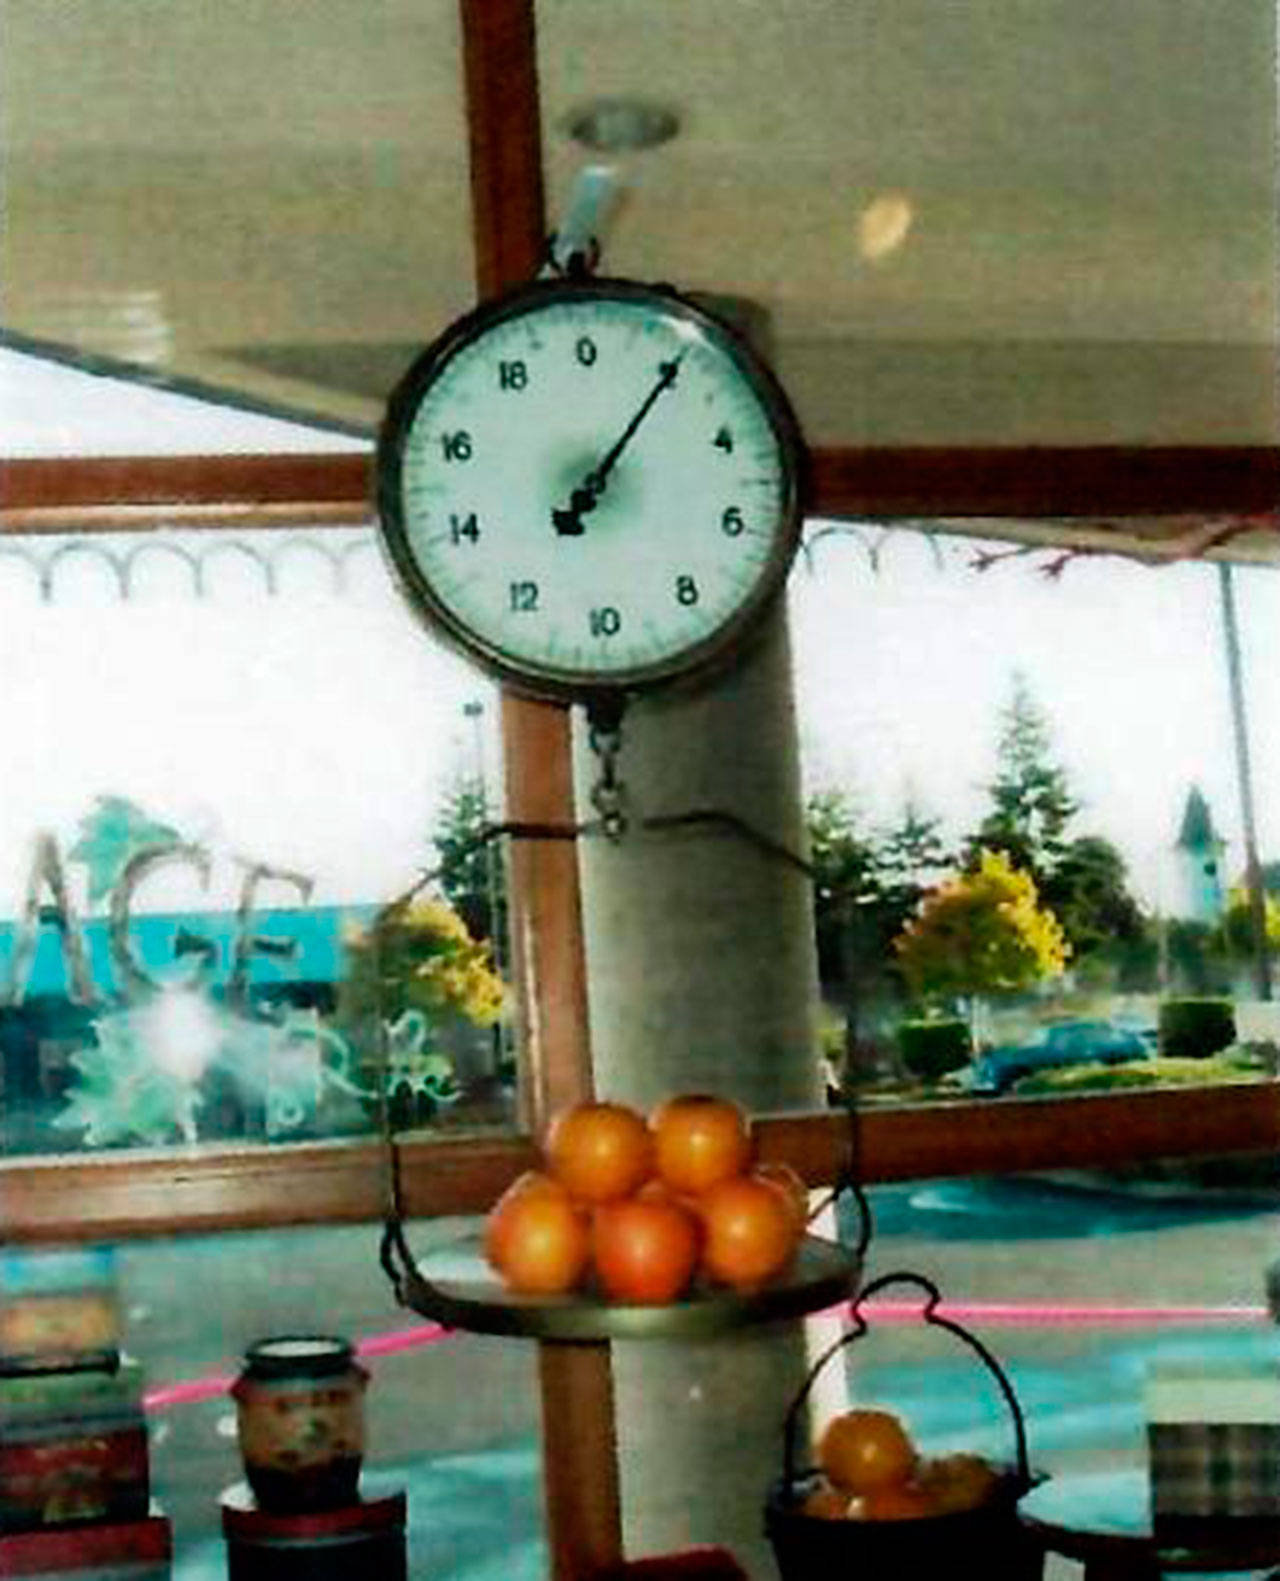 This scale hung in the Lindberg Open Air Market in Port Angeles while Marvin Lindberg owned the store. (Judi Lindberg)